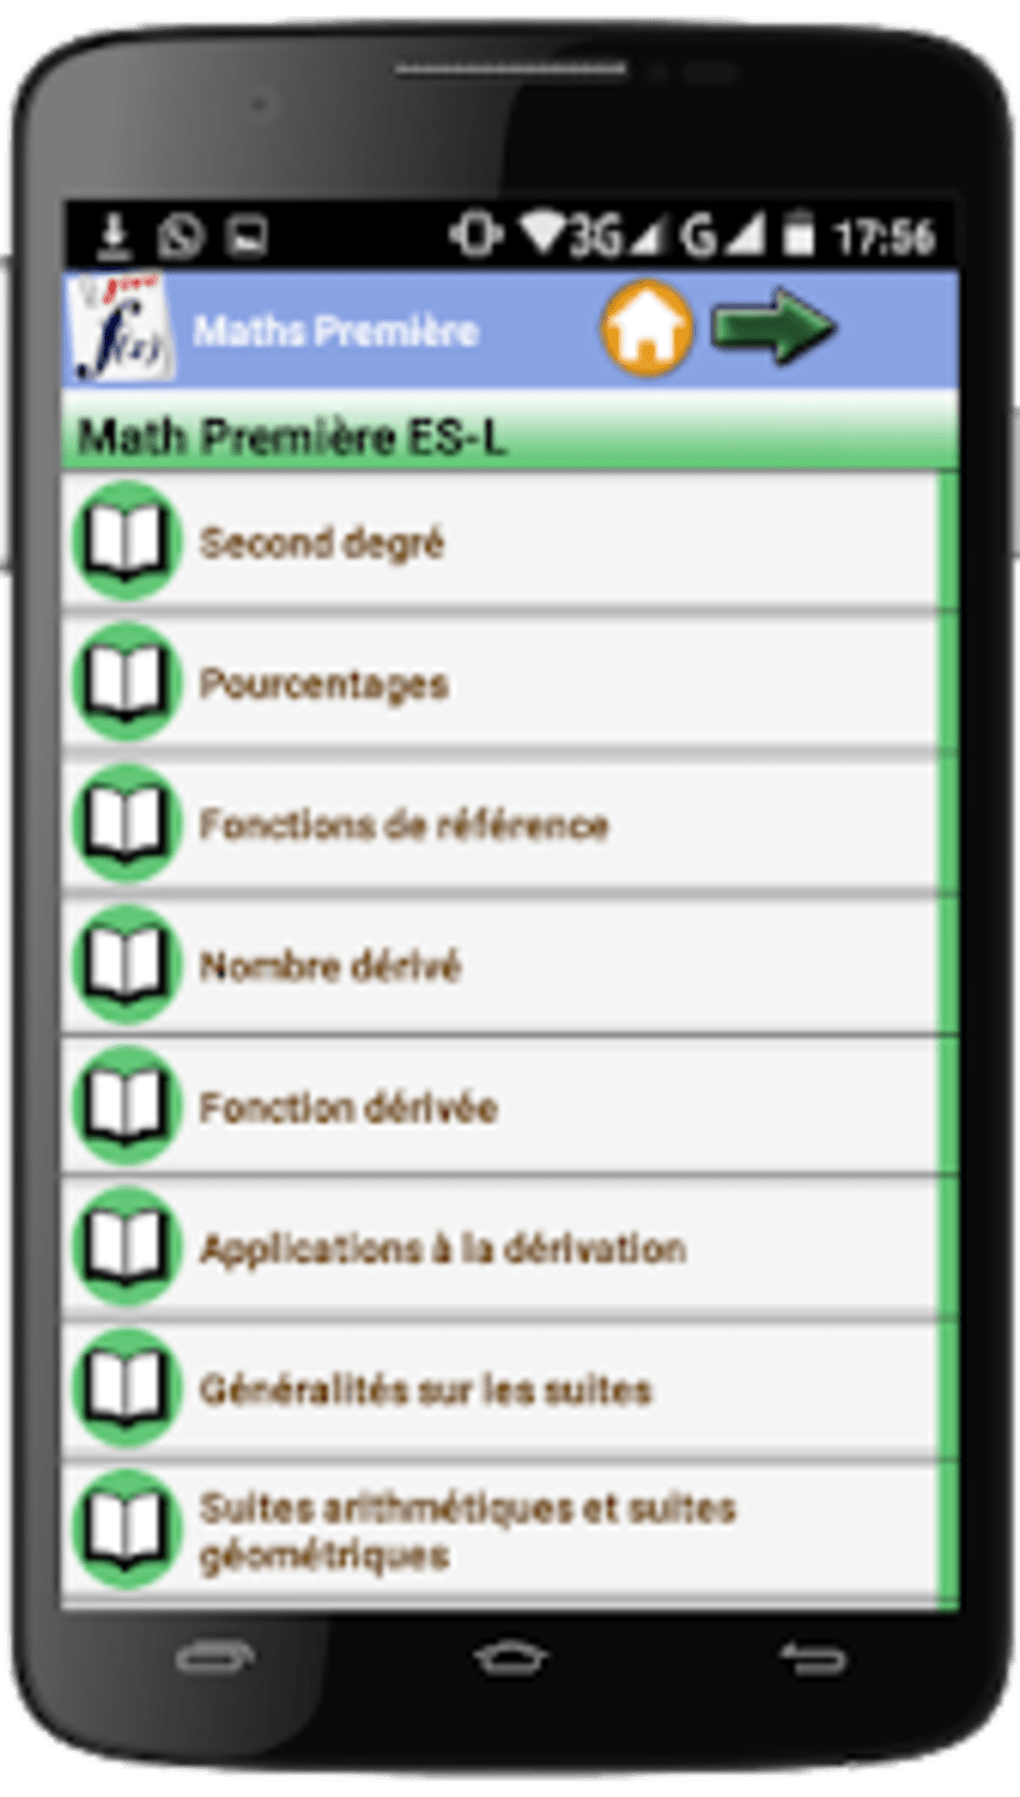 maths-premi-re-for-android